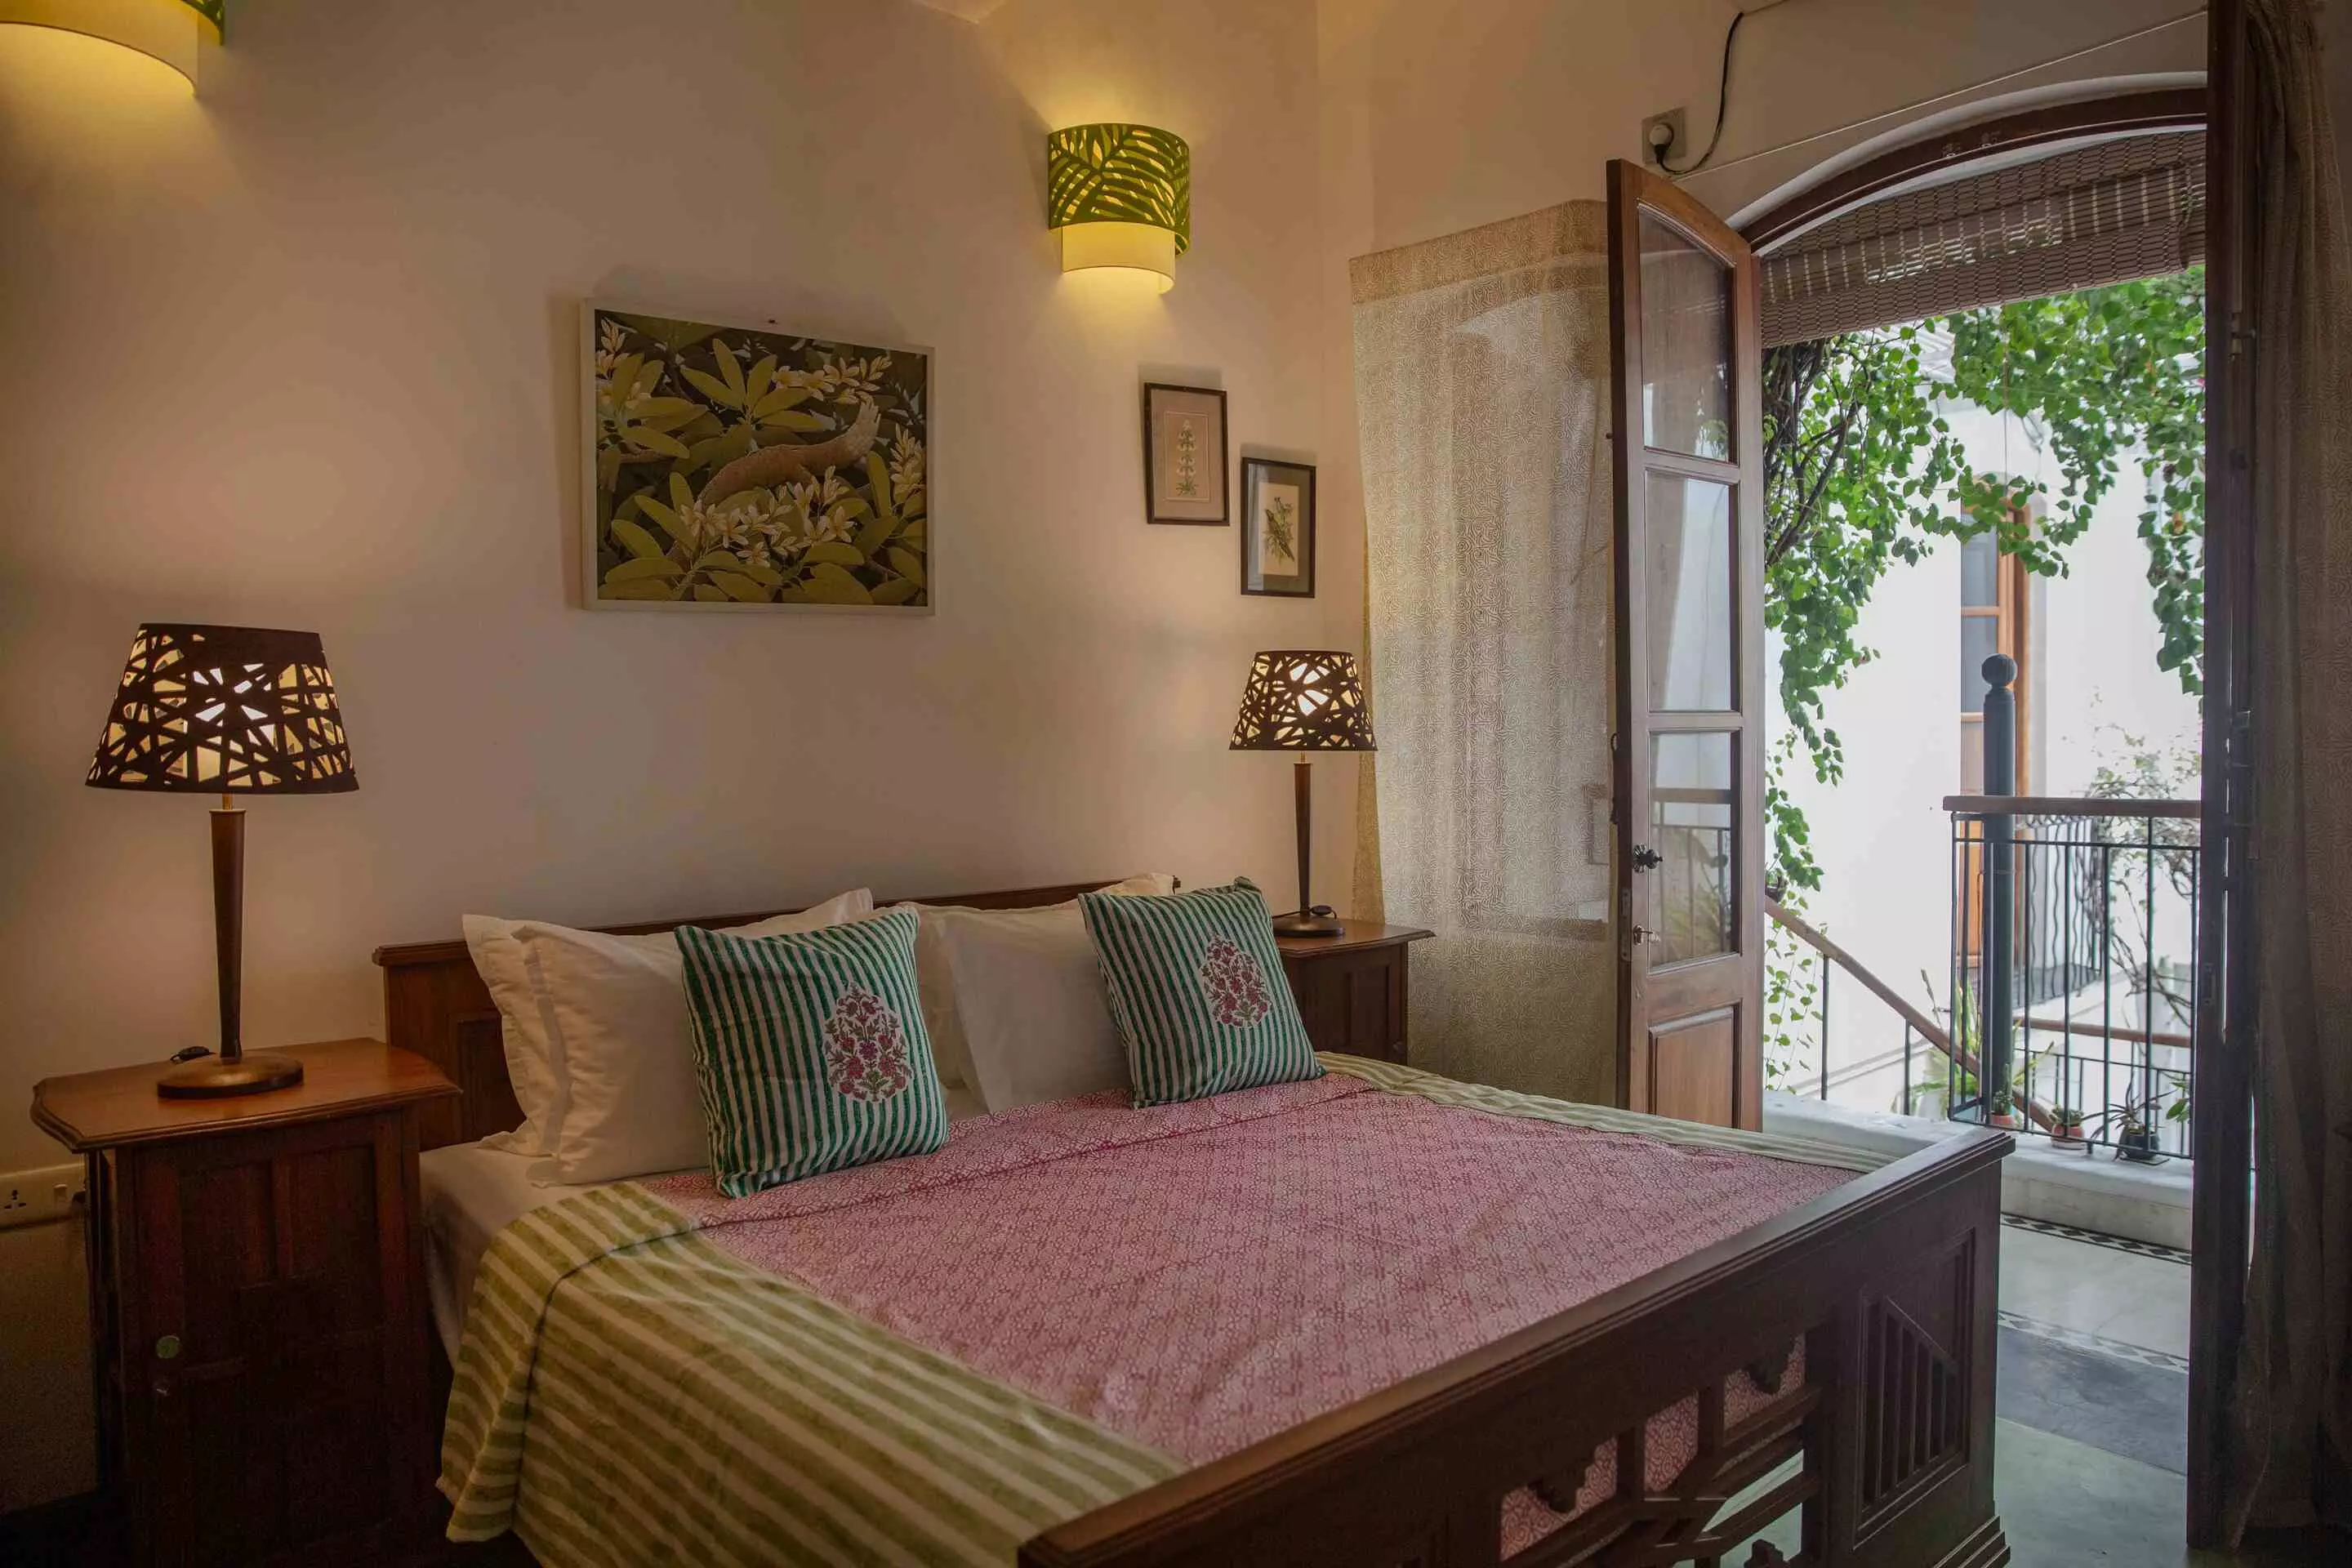 Residence de l’Evėché Opens its Doors, Inviting Guests to Experience the Charm of Pondicherry’s French Quarter